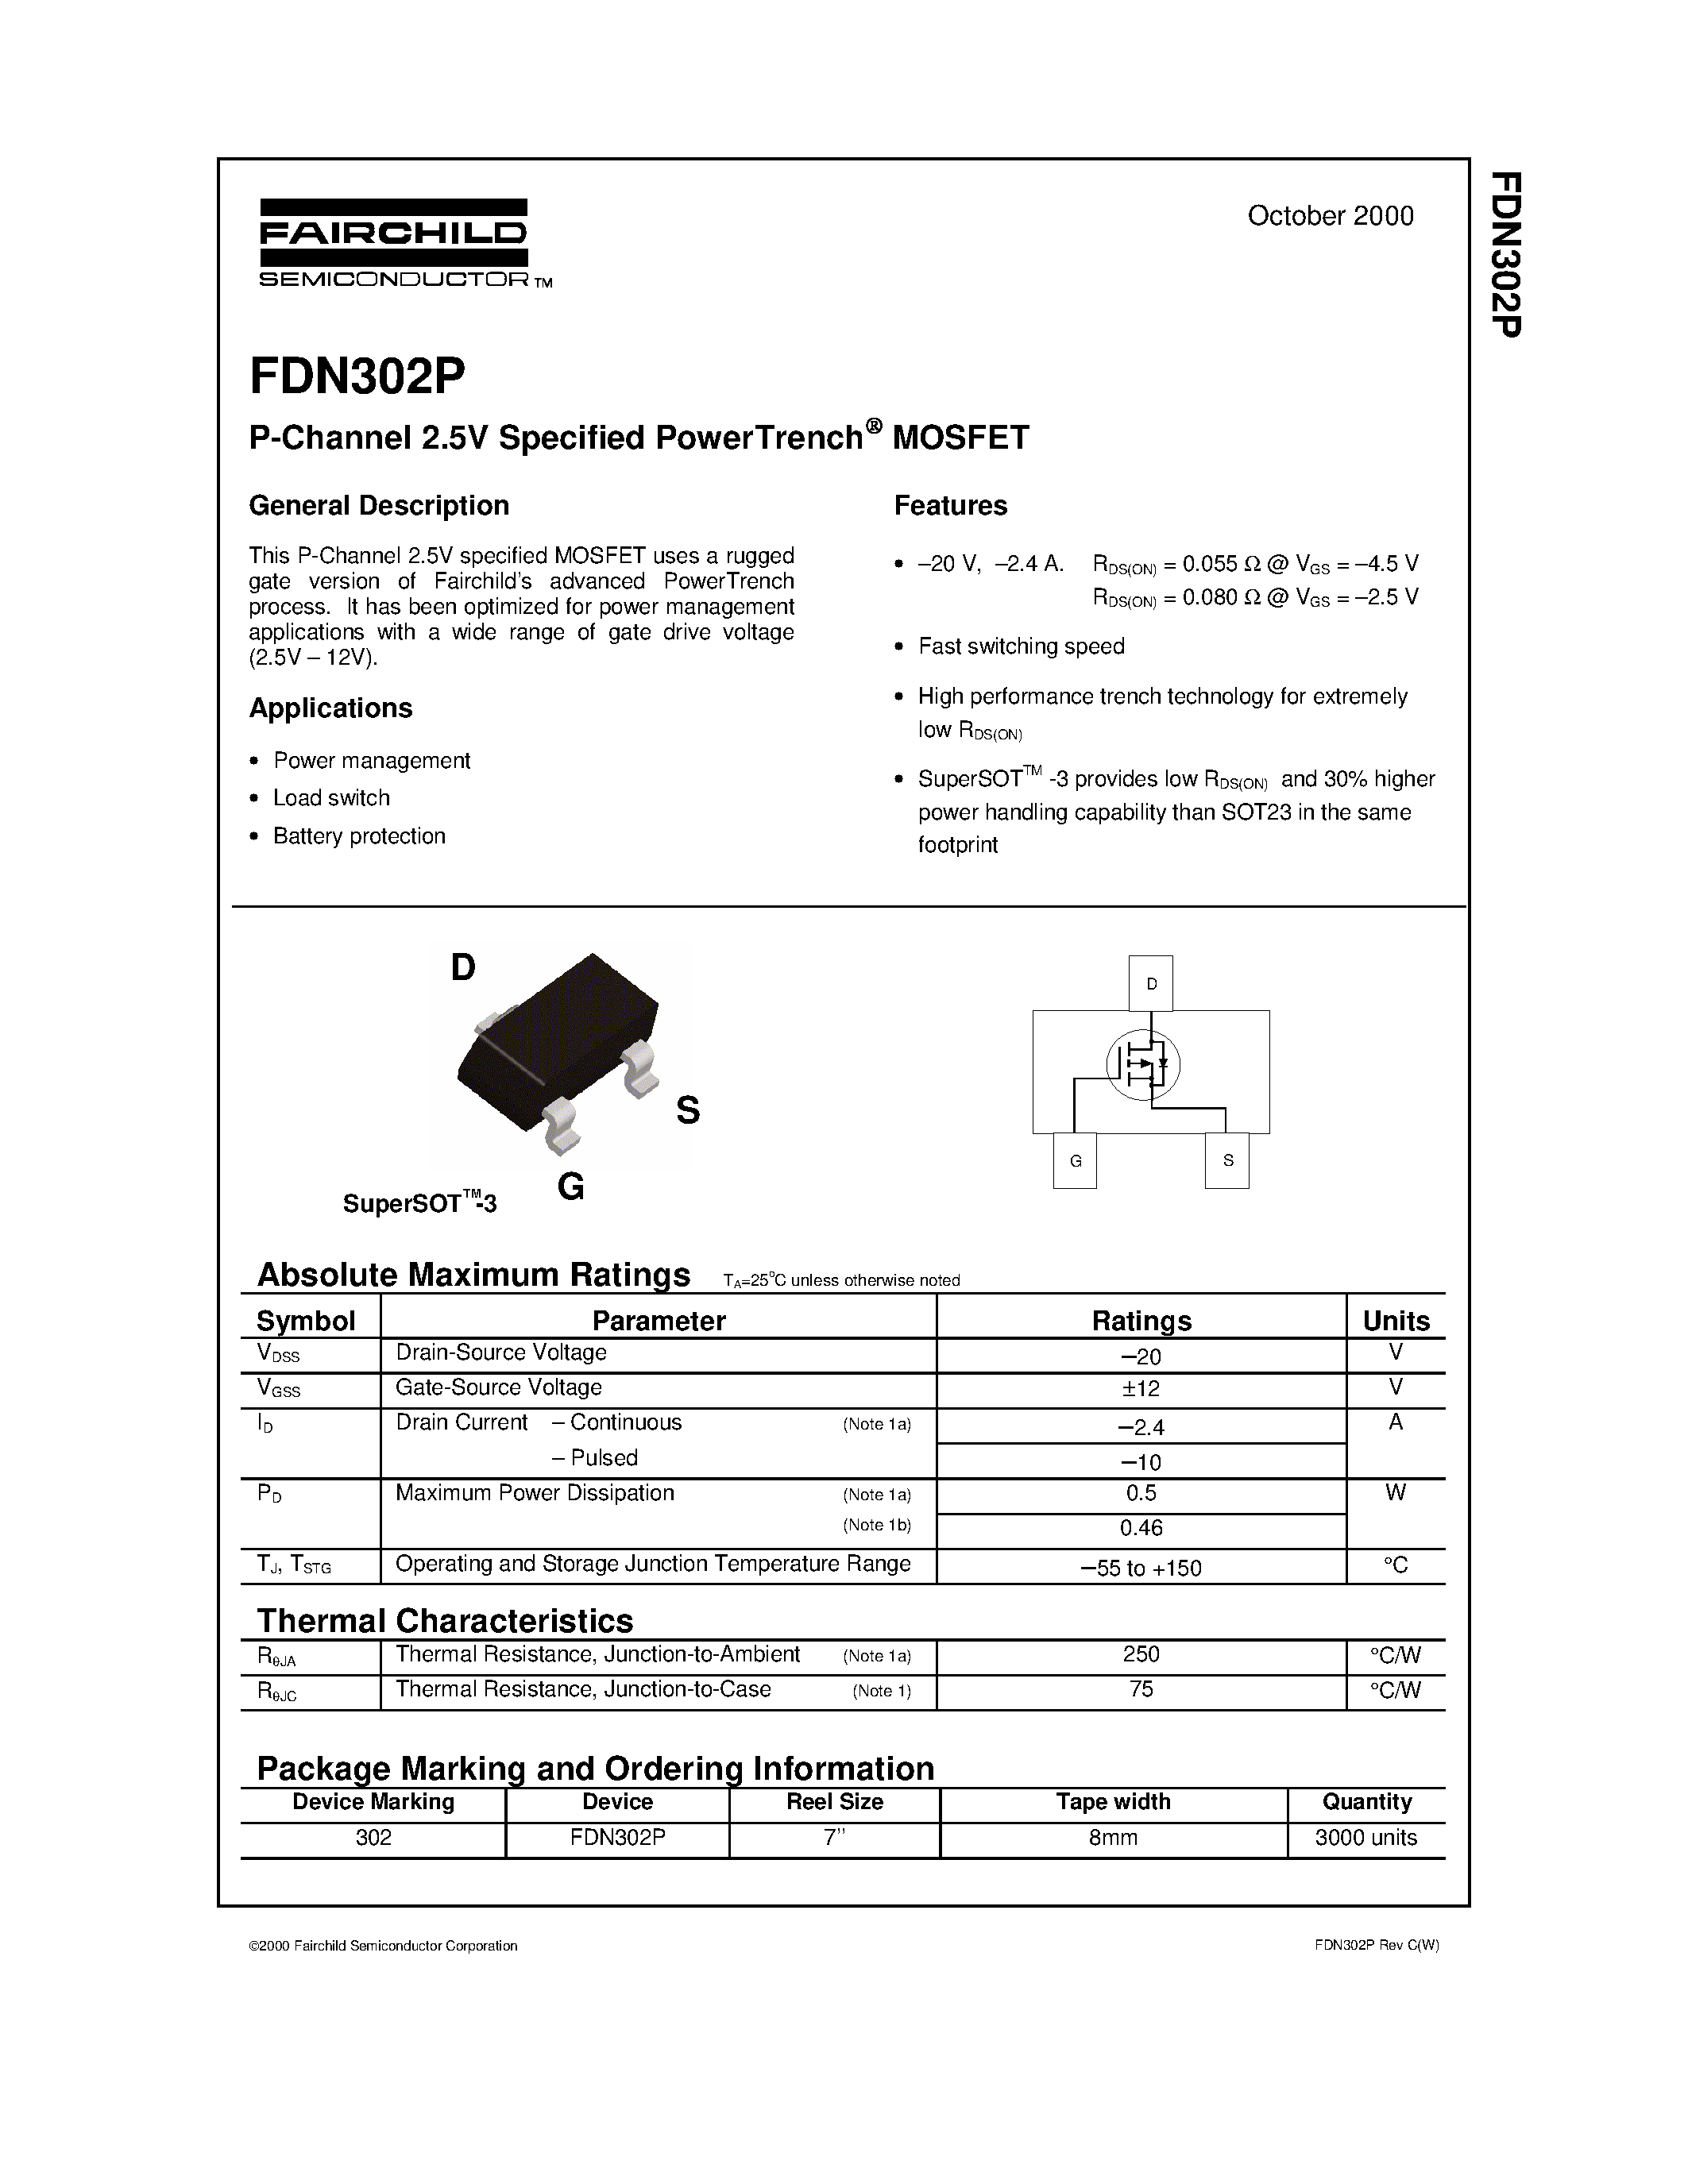 Даташит FDN302P-P-Channel 2.5V Specified PowerTrench MOSFET страница 1